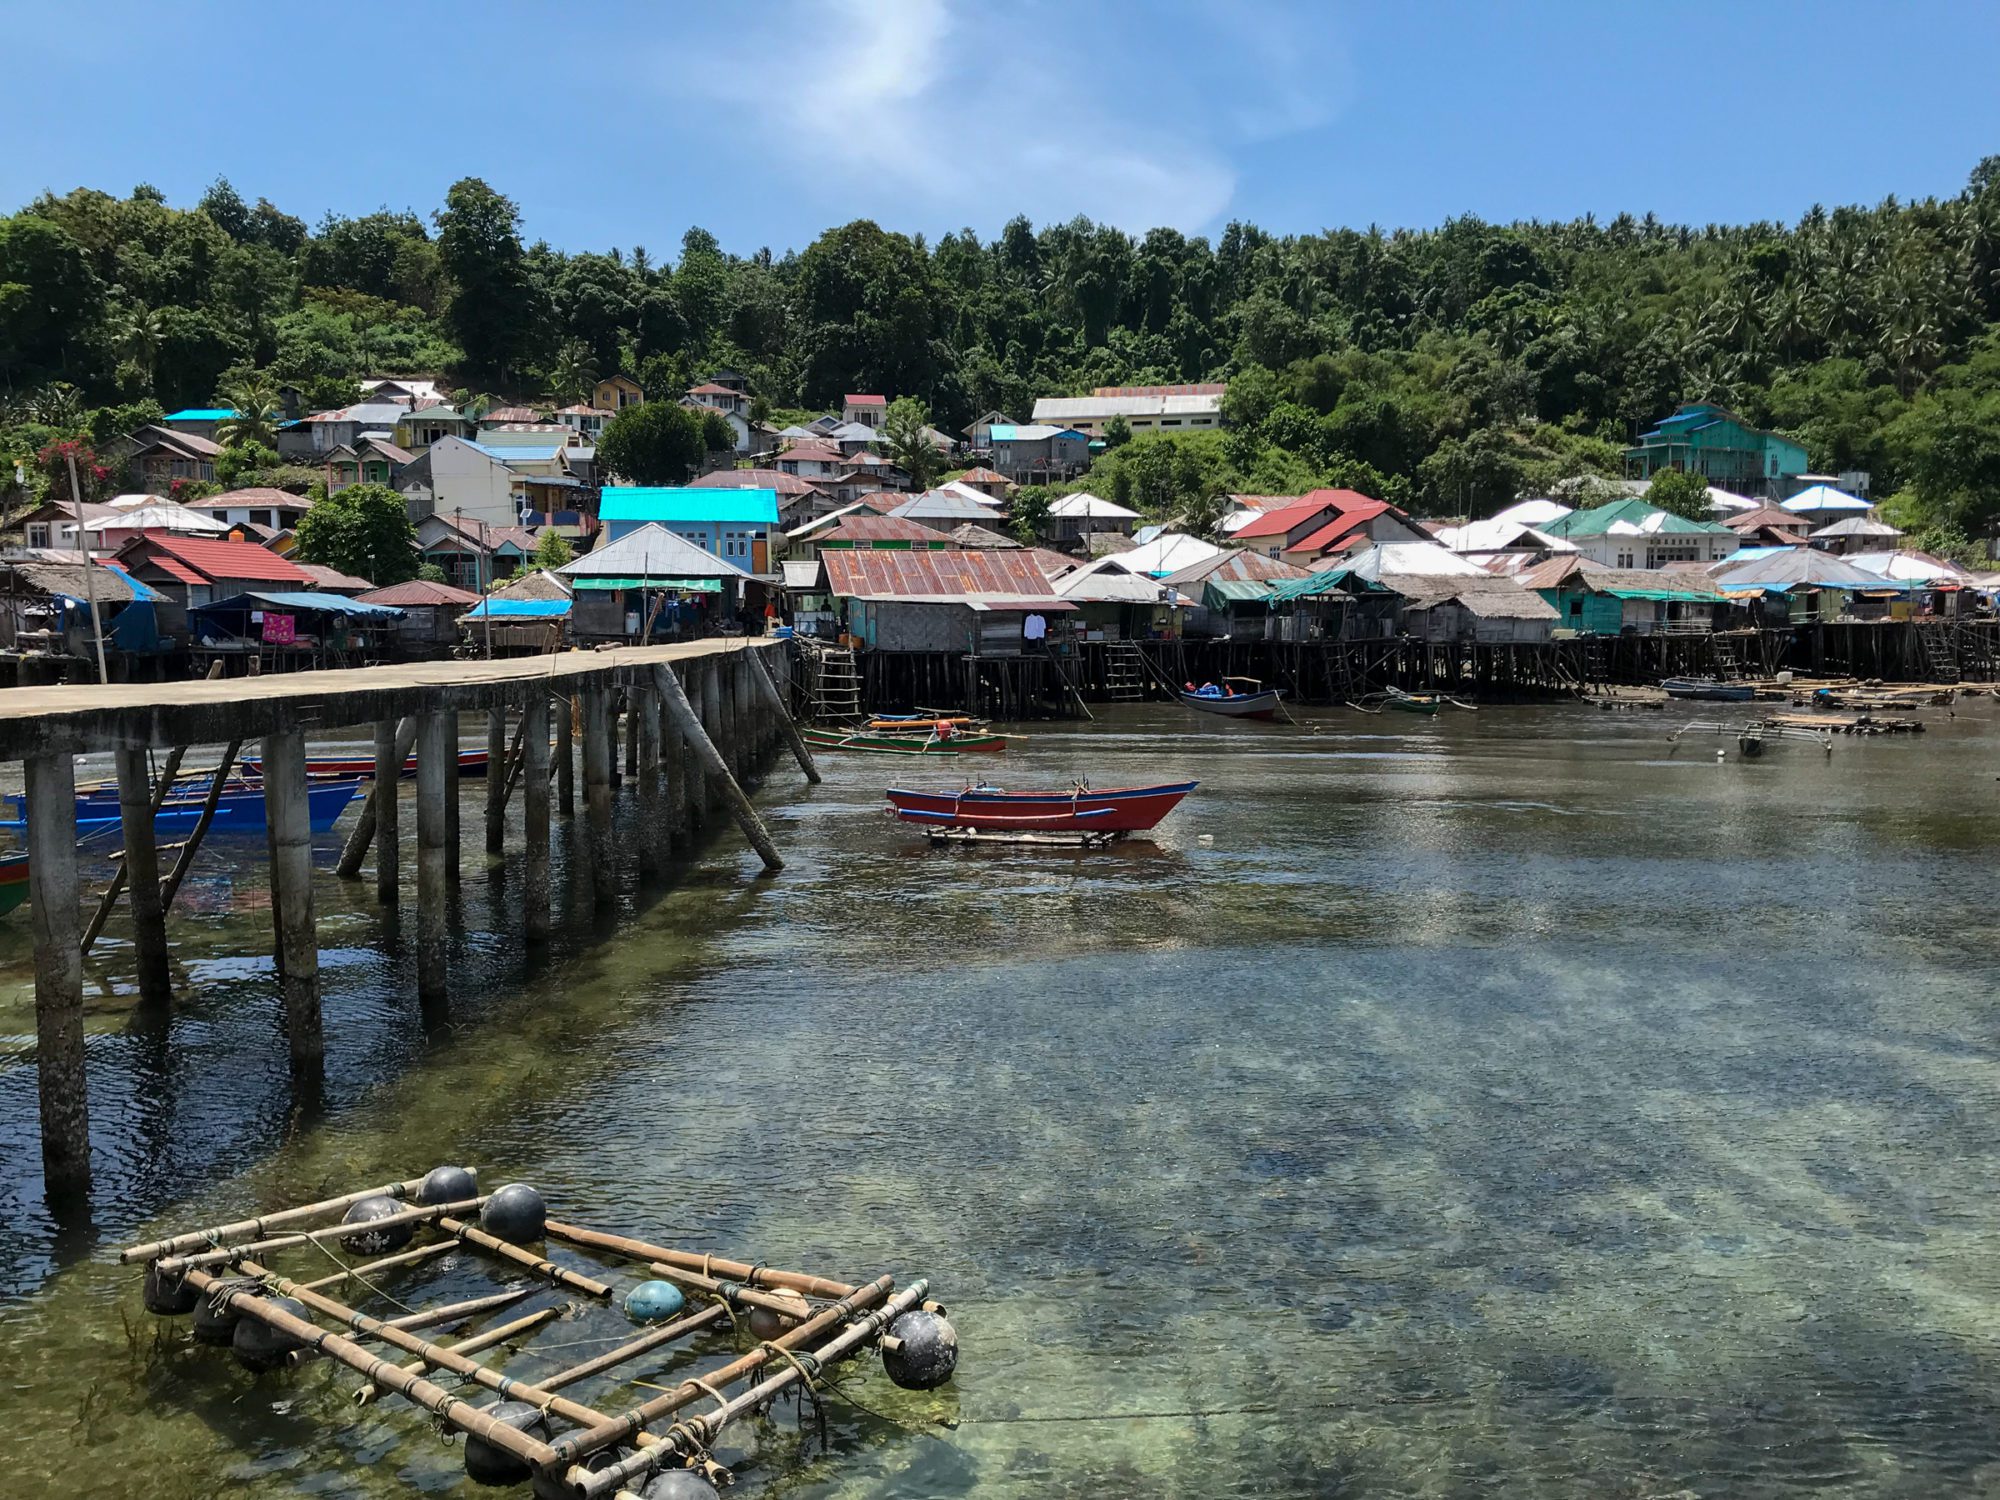 A sunny day in Bulutui village